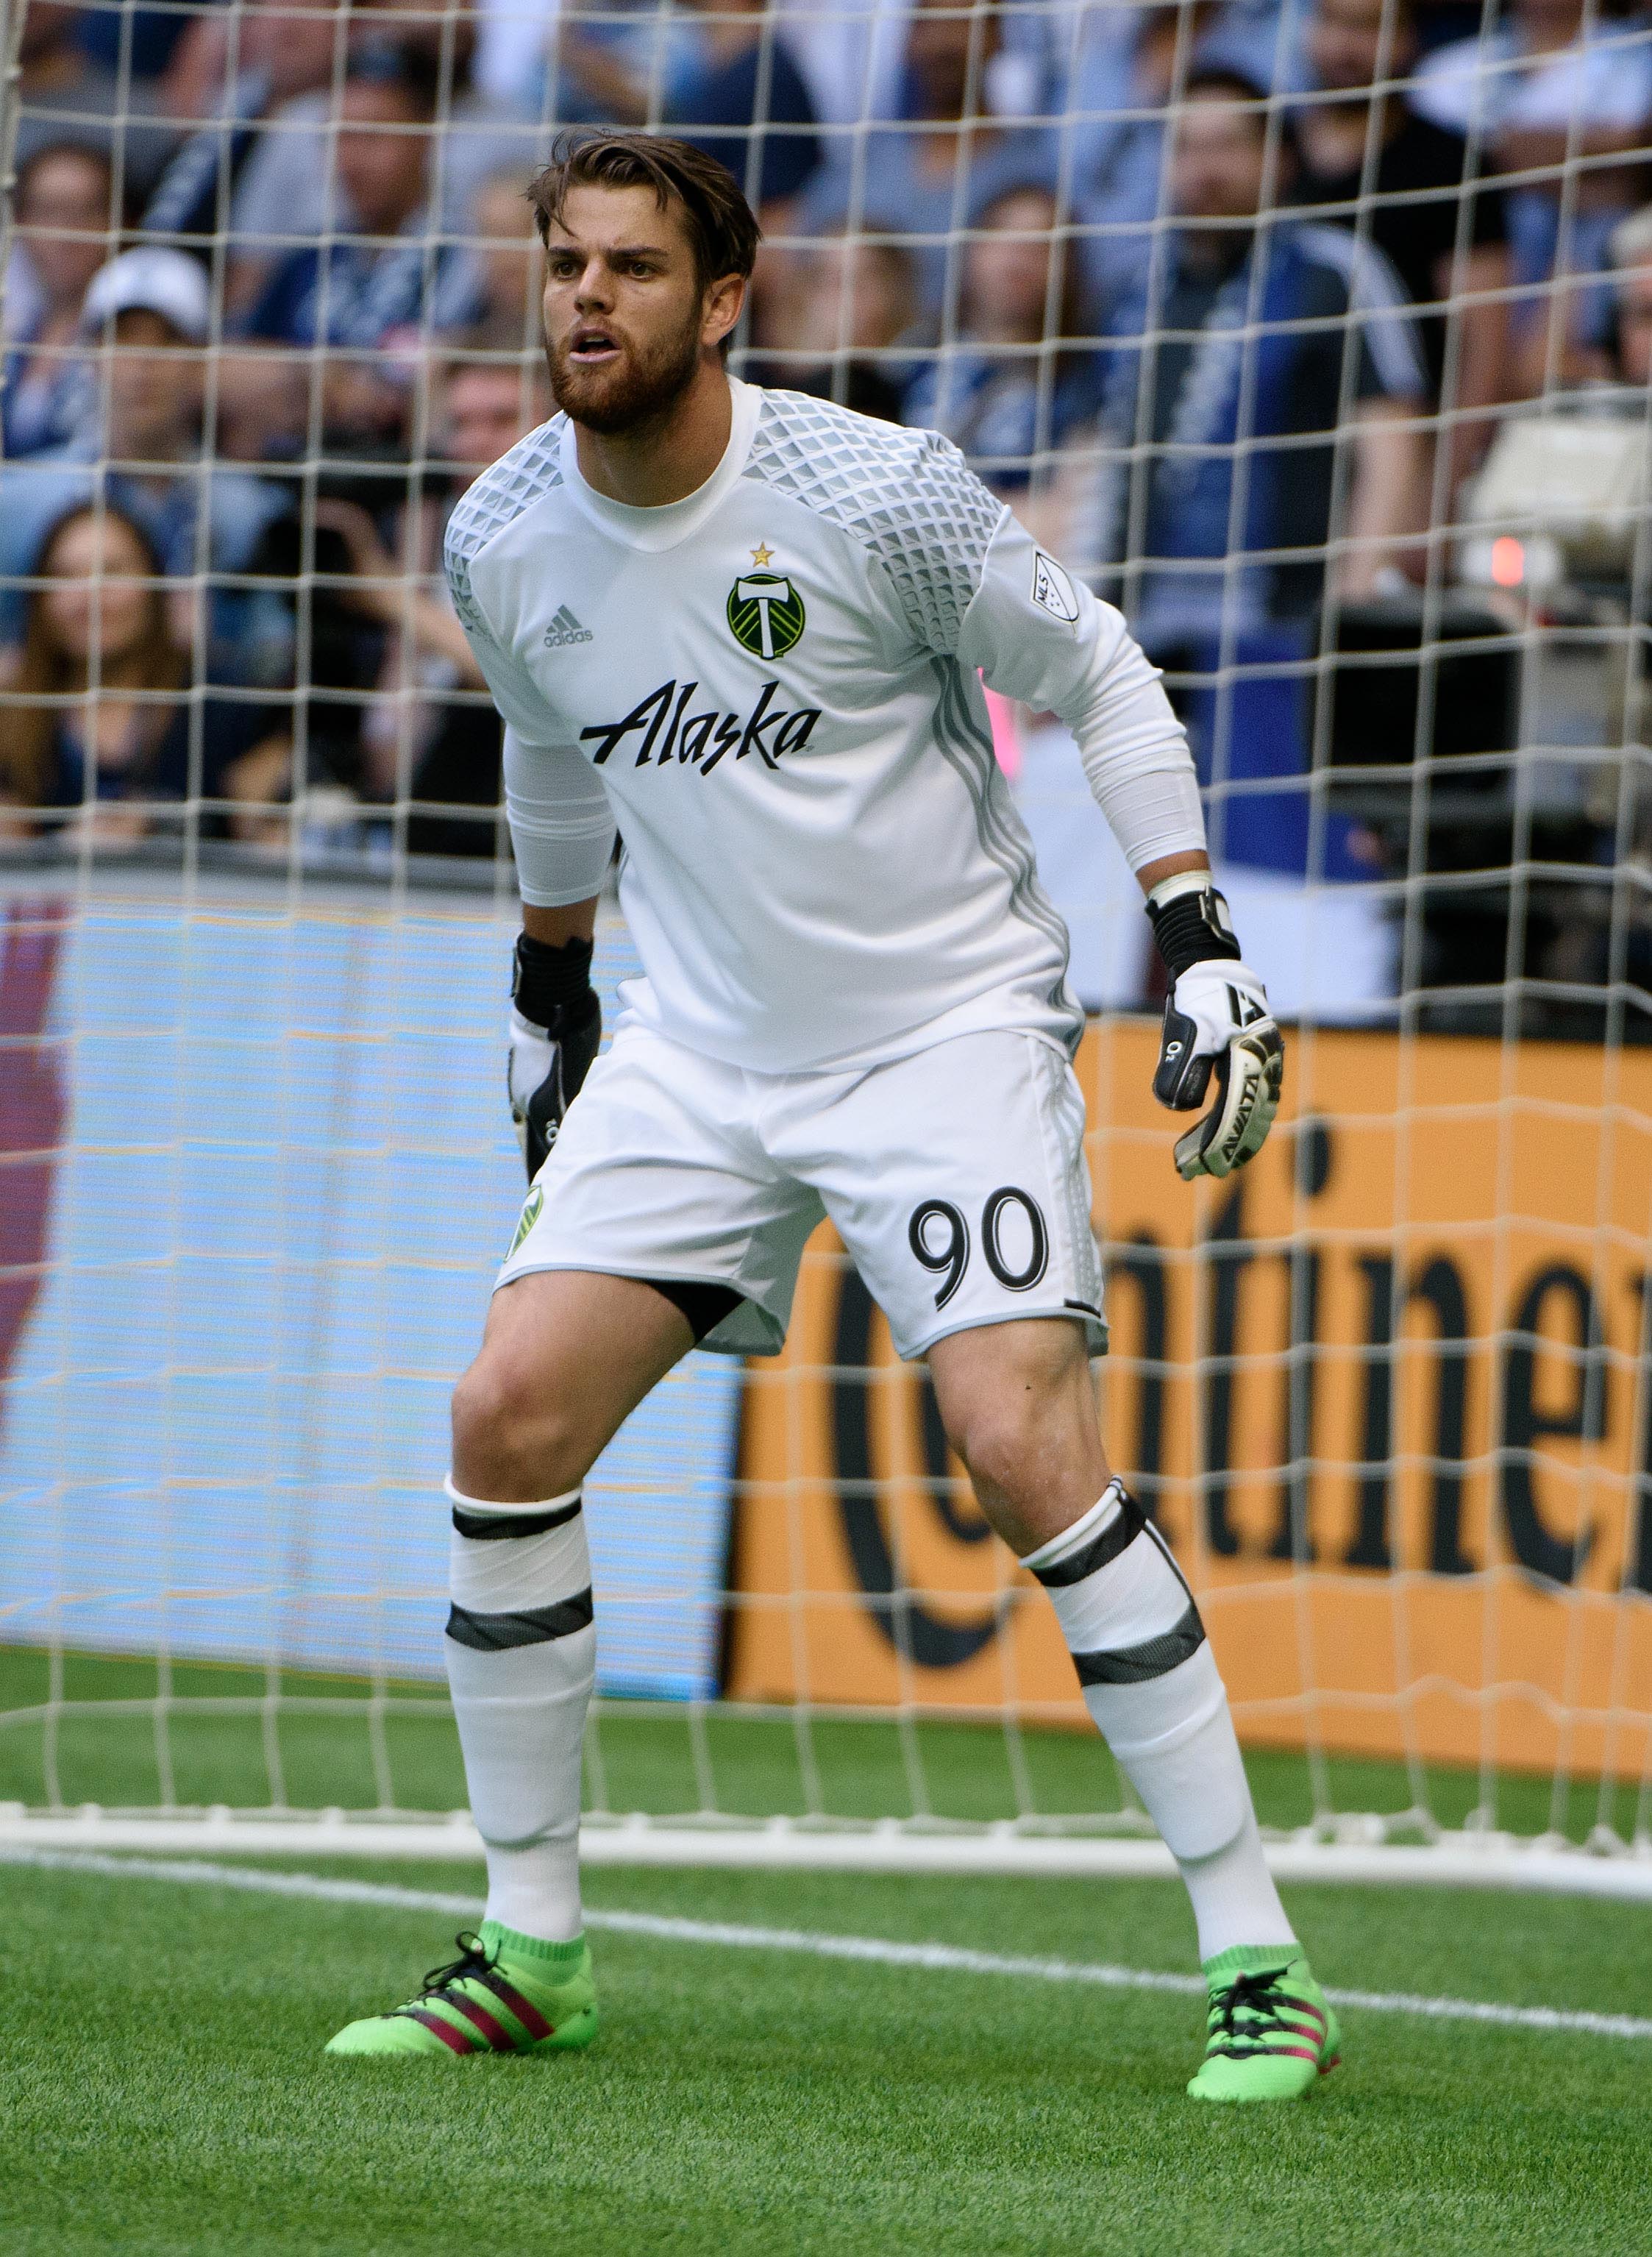 The Timbers' Jake Gleeson has been one of the season's revelation in MLS